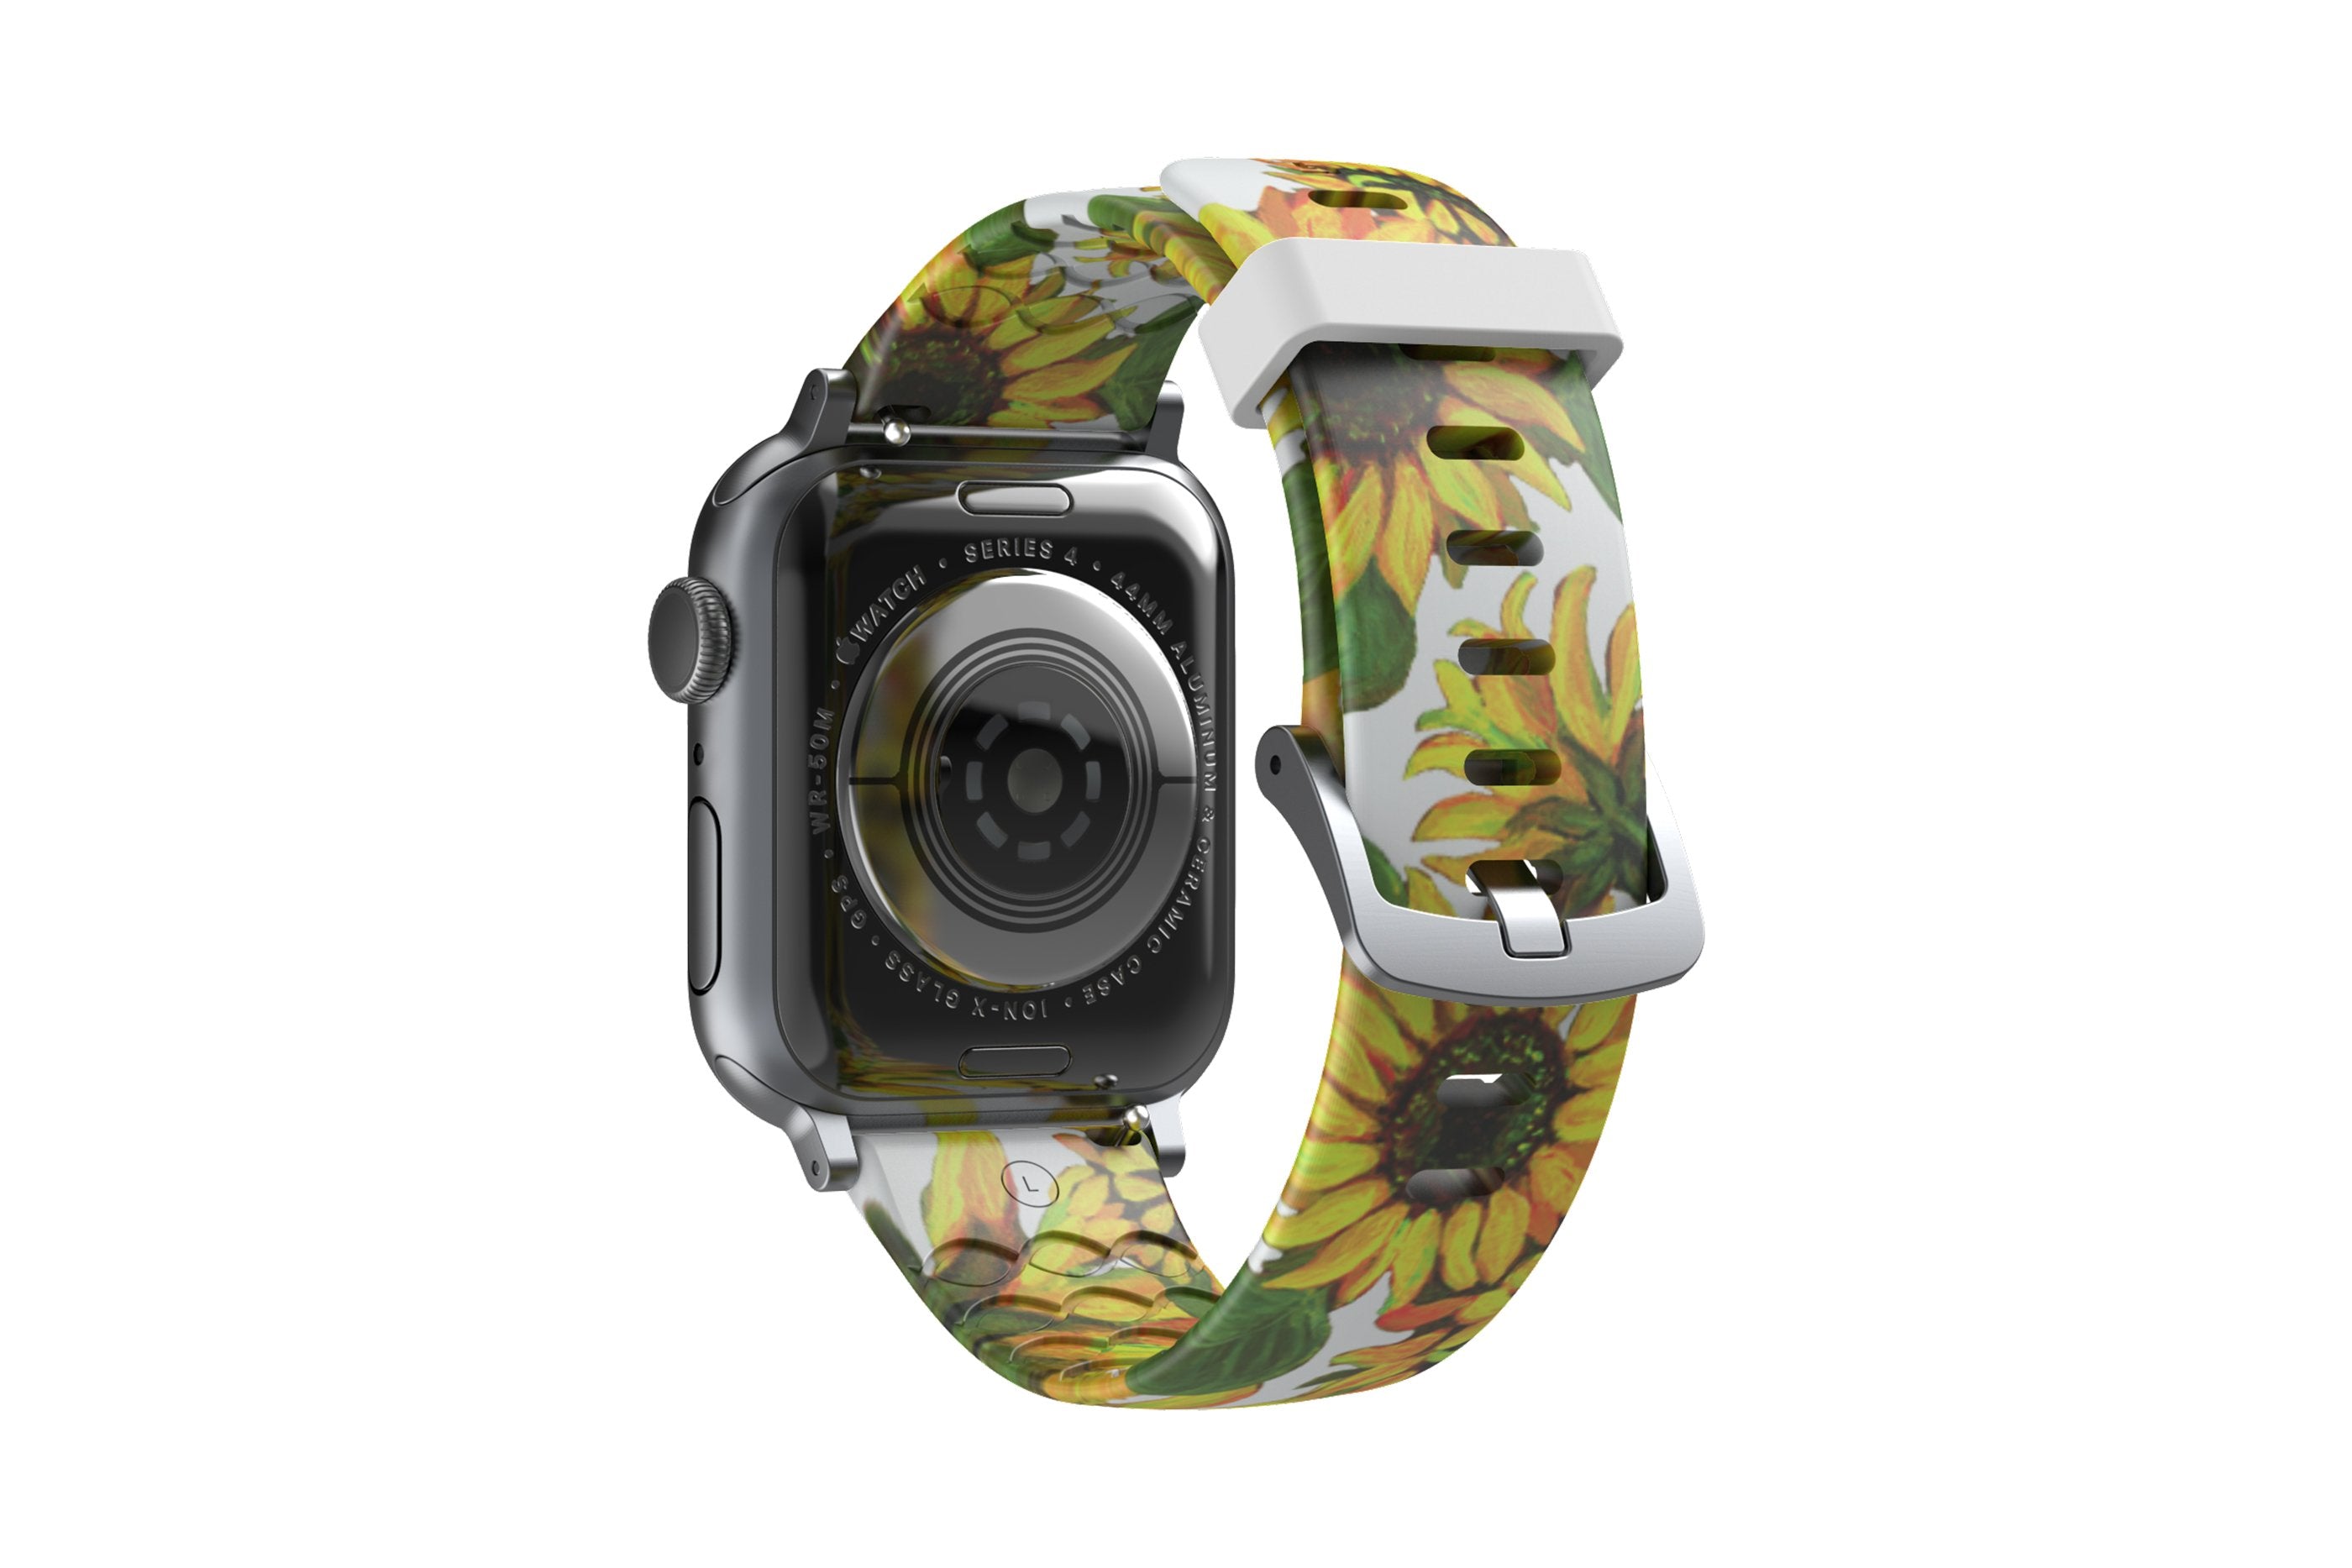 Sunflower Apple Watch Band with silver hardware viewed from top down